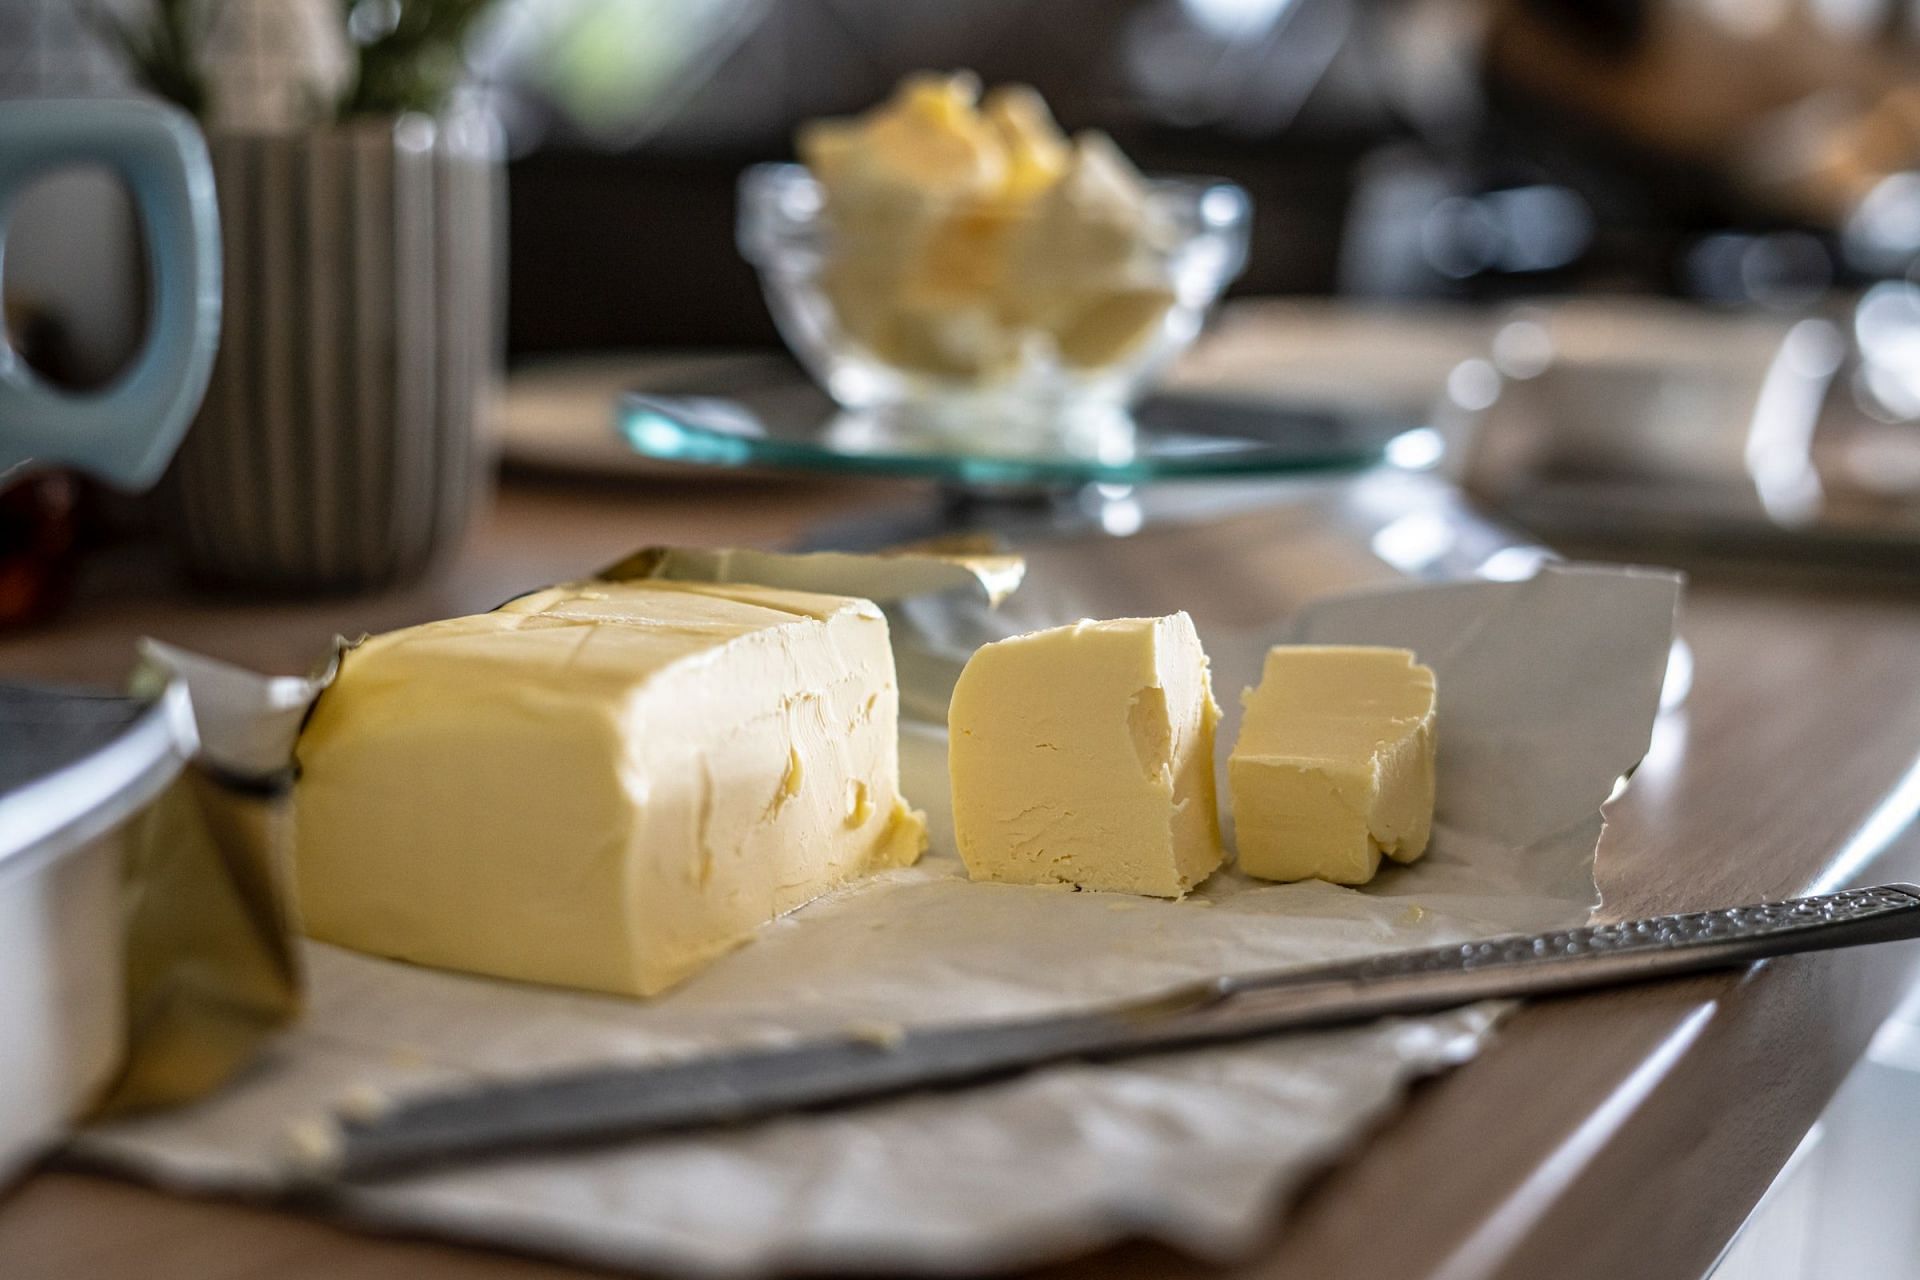 Pure butter is among the foods good for cholesterol control.(Image via Unsplash/Sorin Gheorghita)